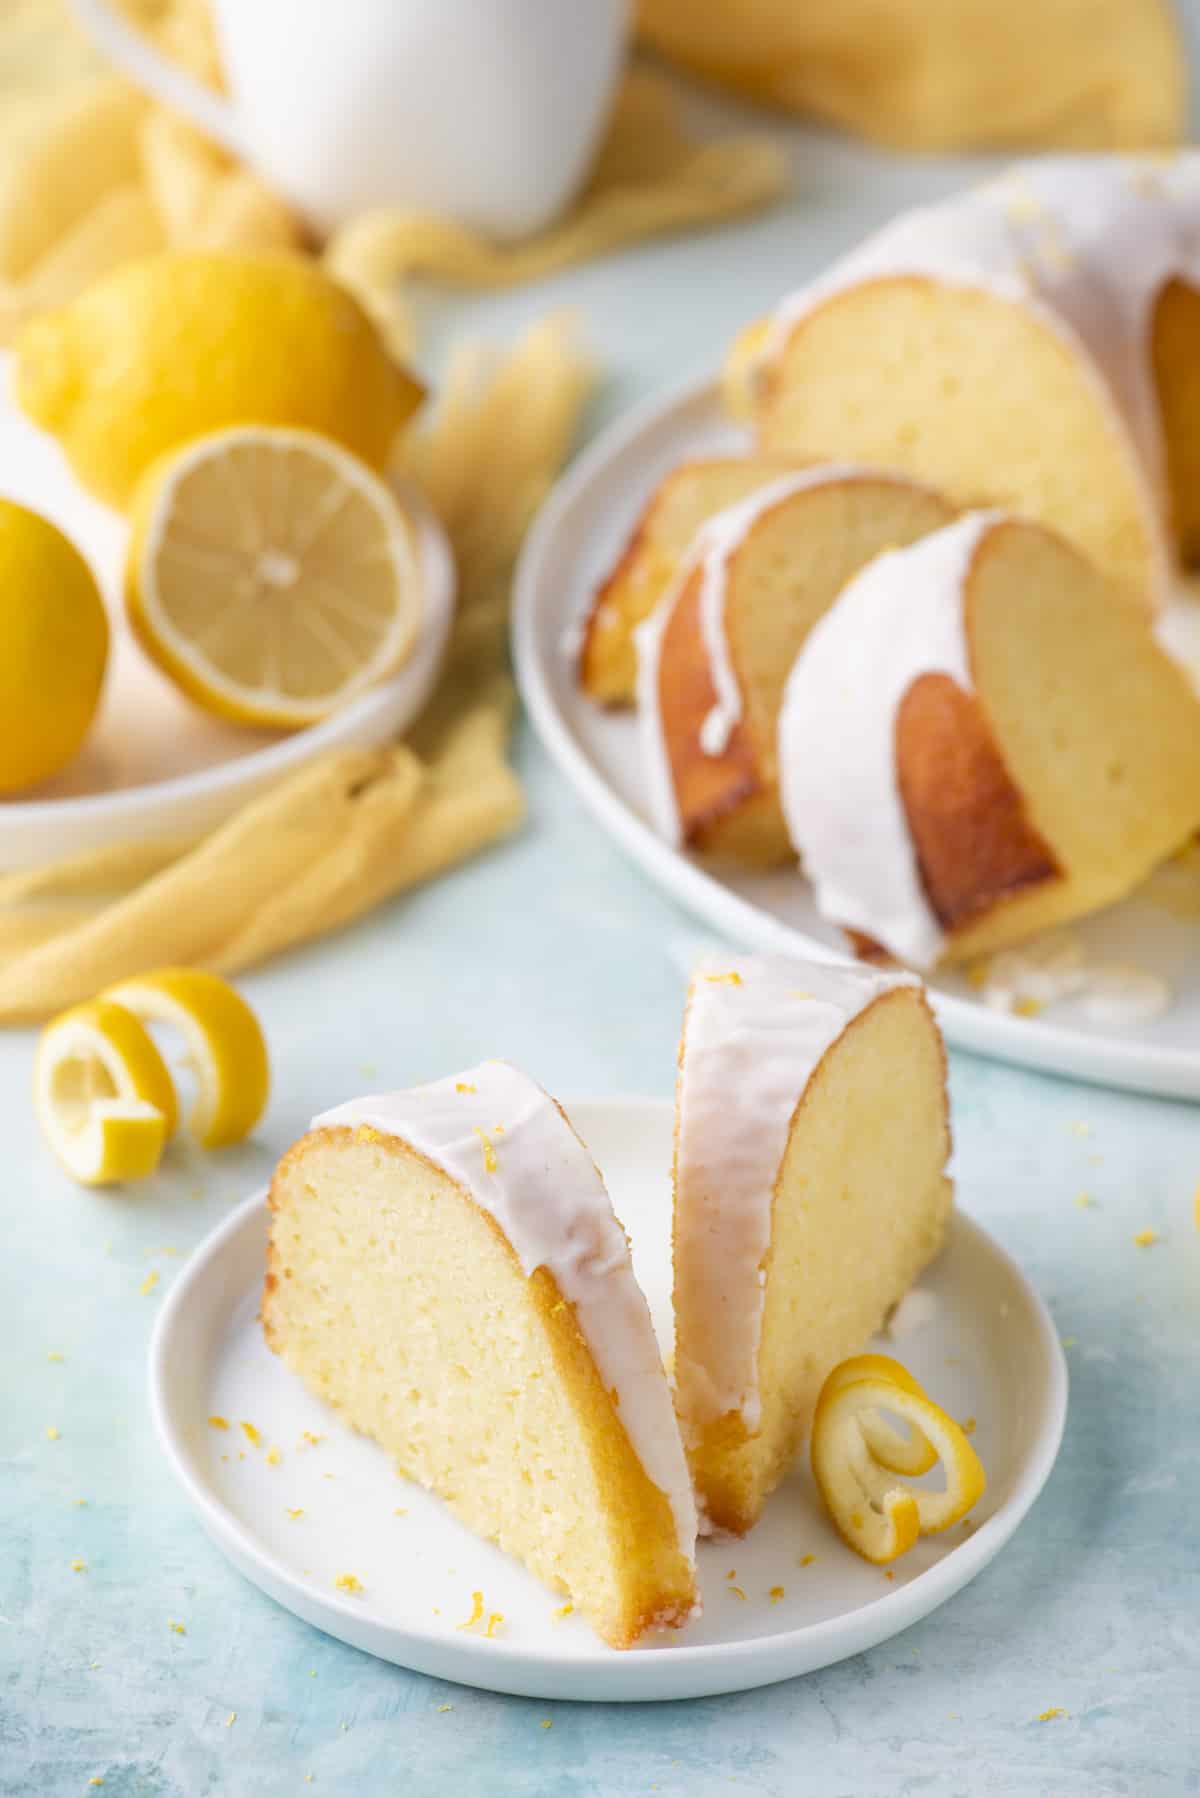 two slices of lemon bundt cake on a small white plate, surrounded by fresh lemon peels, a white plate with more slices of cake and another white plate with fresh lemons